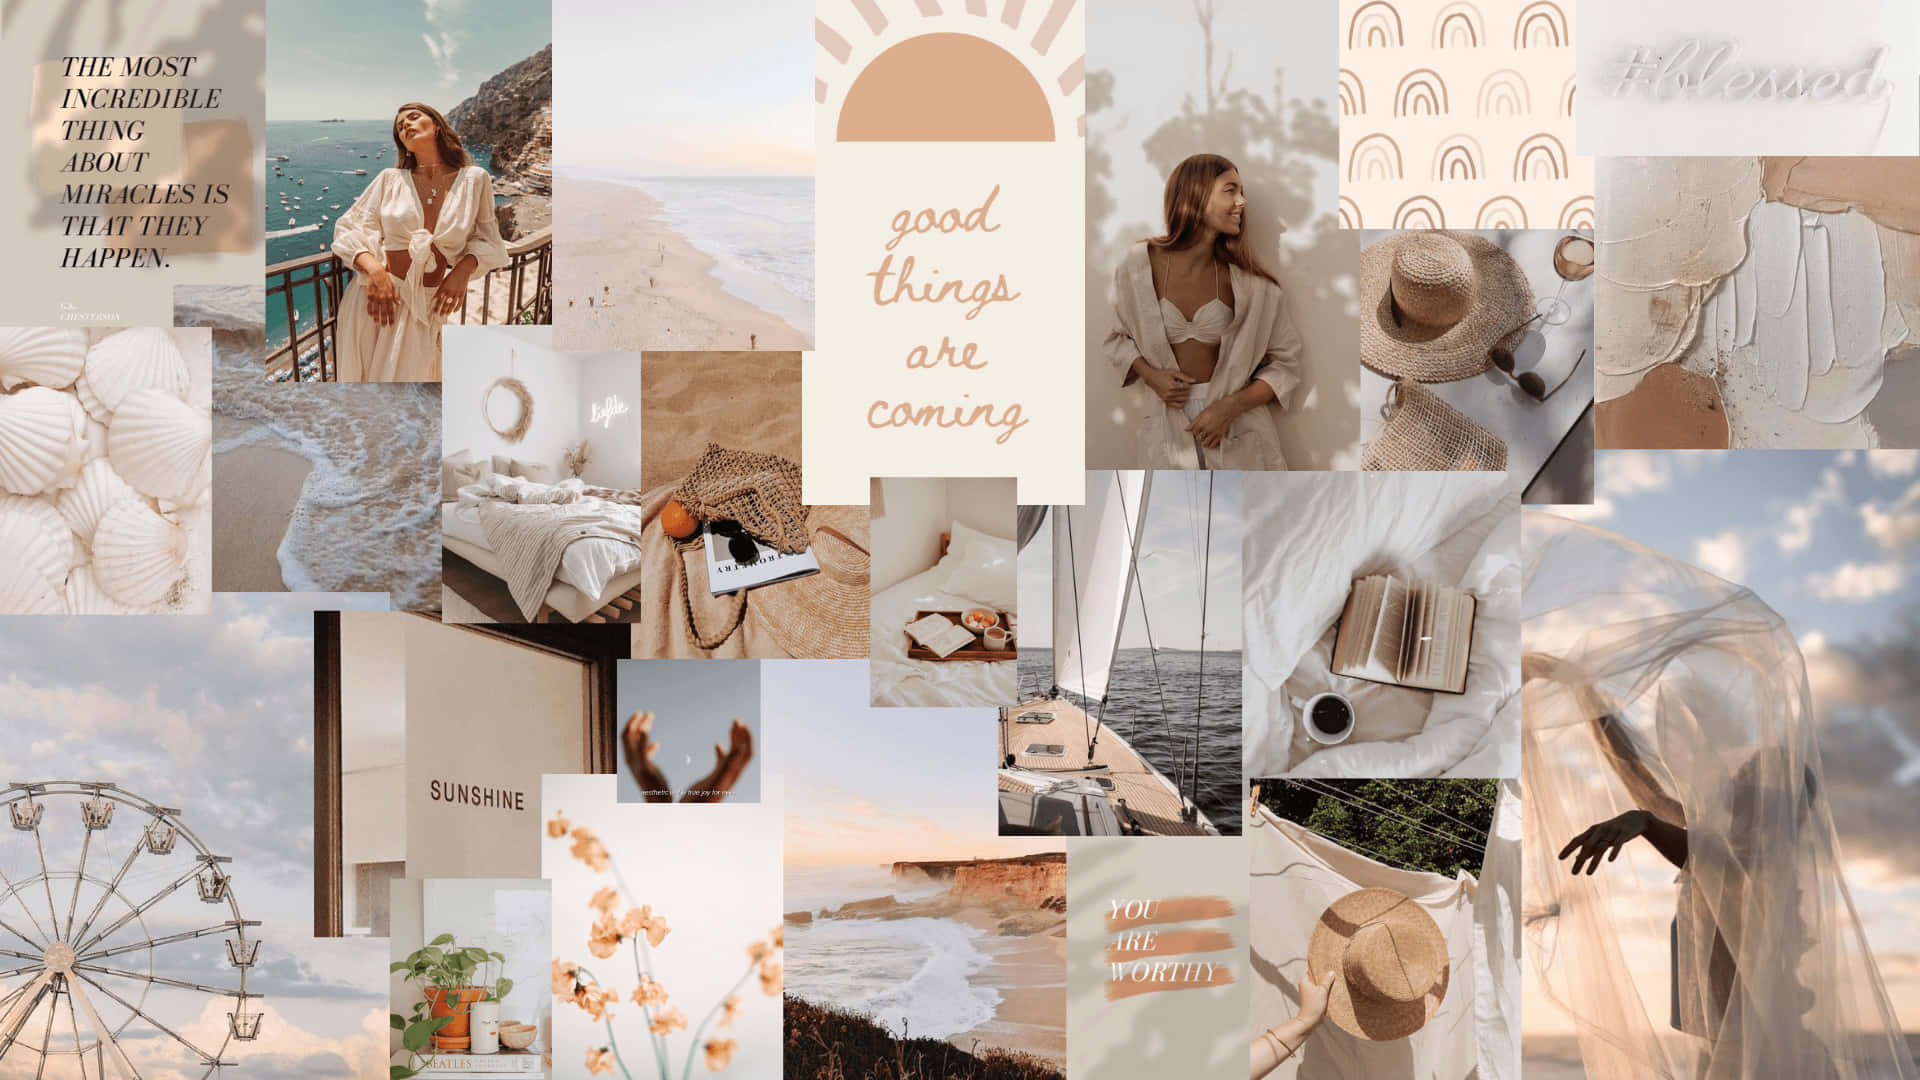 A Collage Of Photos Of Beach And Beach Items Wallpaper